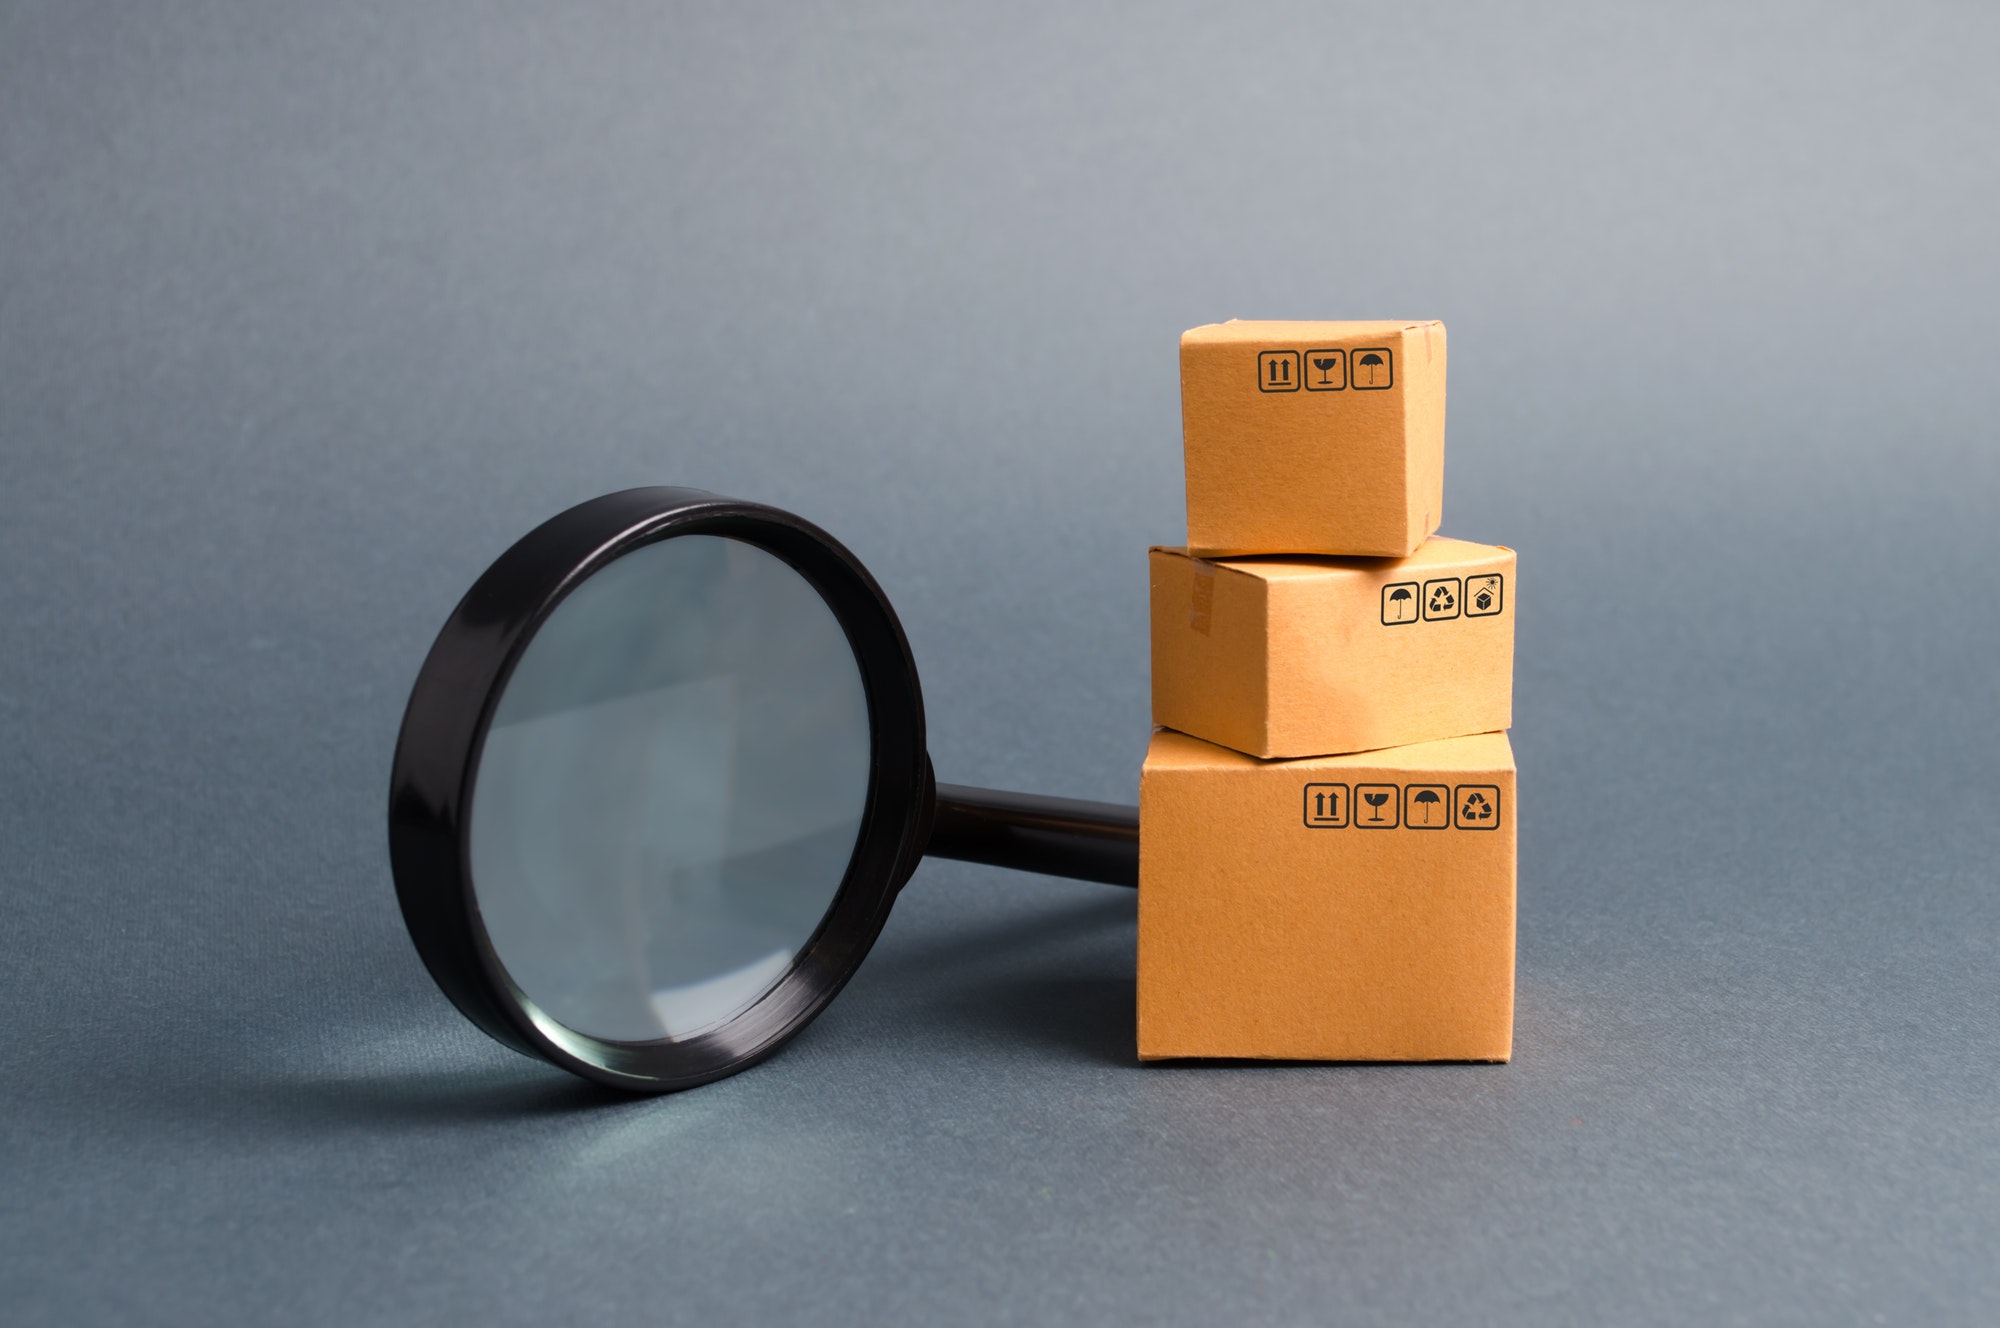 Cardboard boxes and a magnifying glass